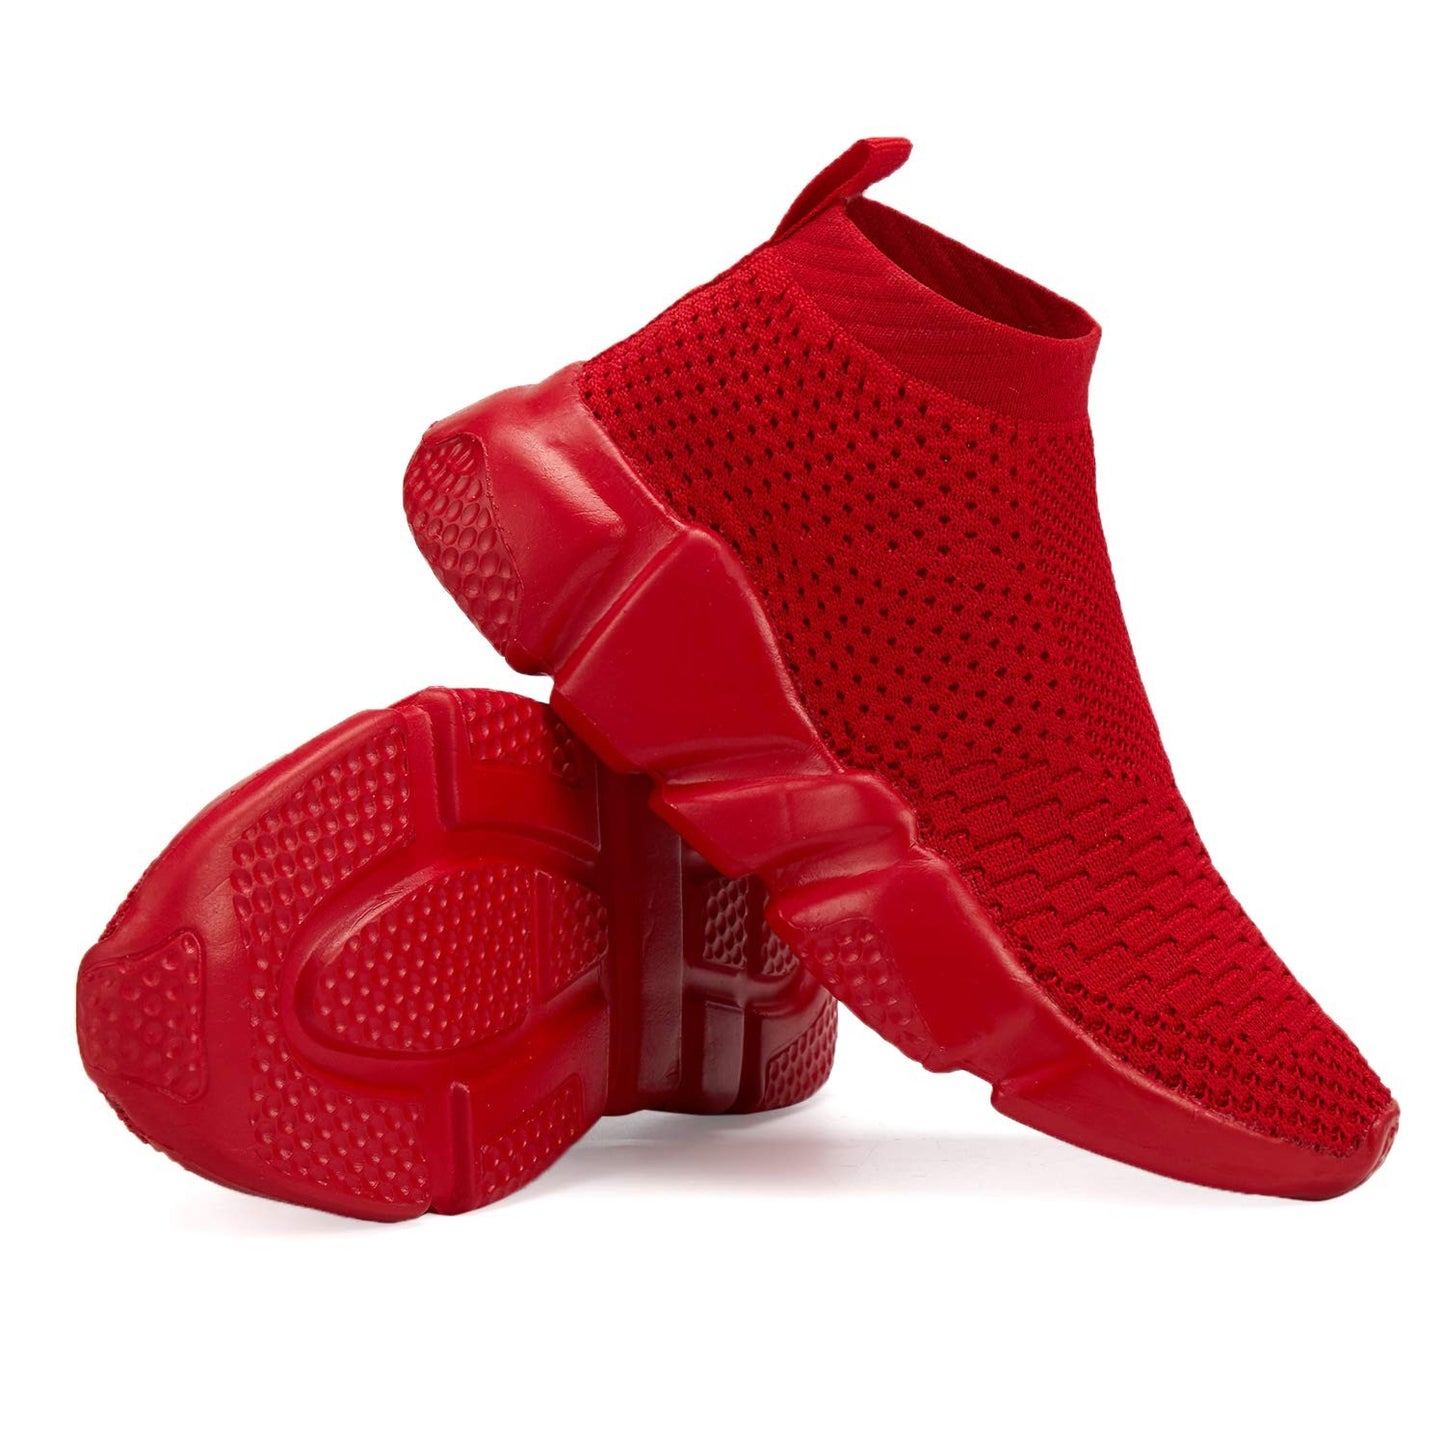 Red Knit Boys' High-Top Sneakers for Toddlers - Size 13 Red Mesh Athletic Shoes